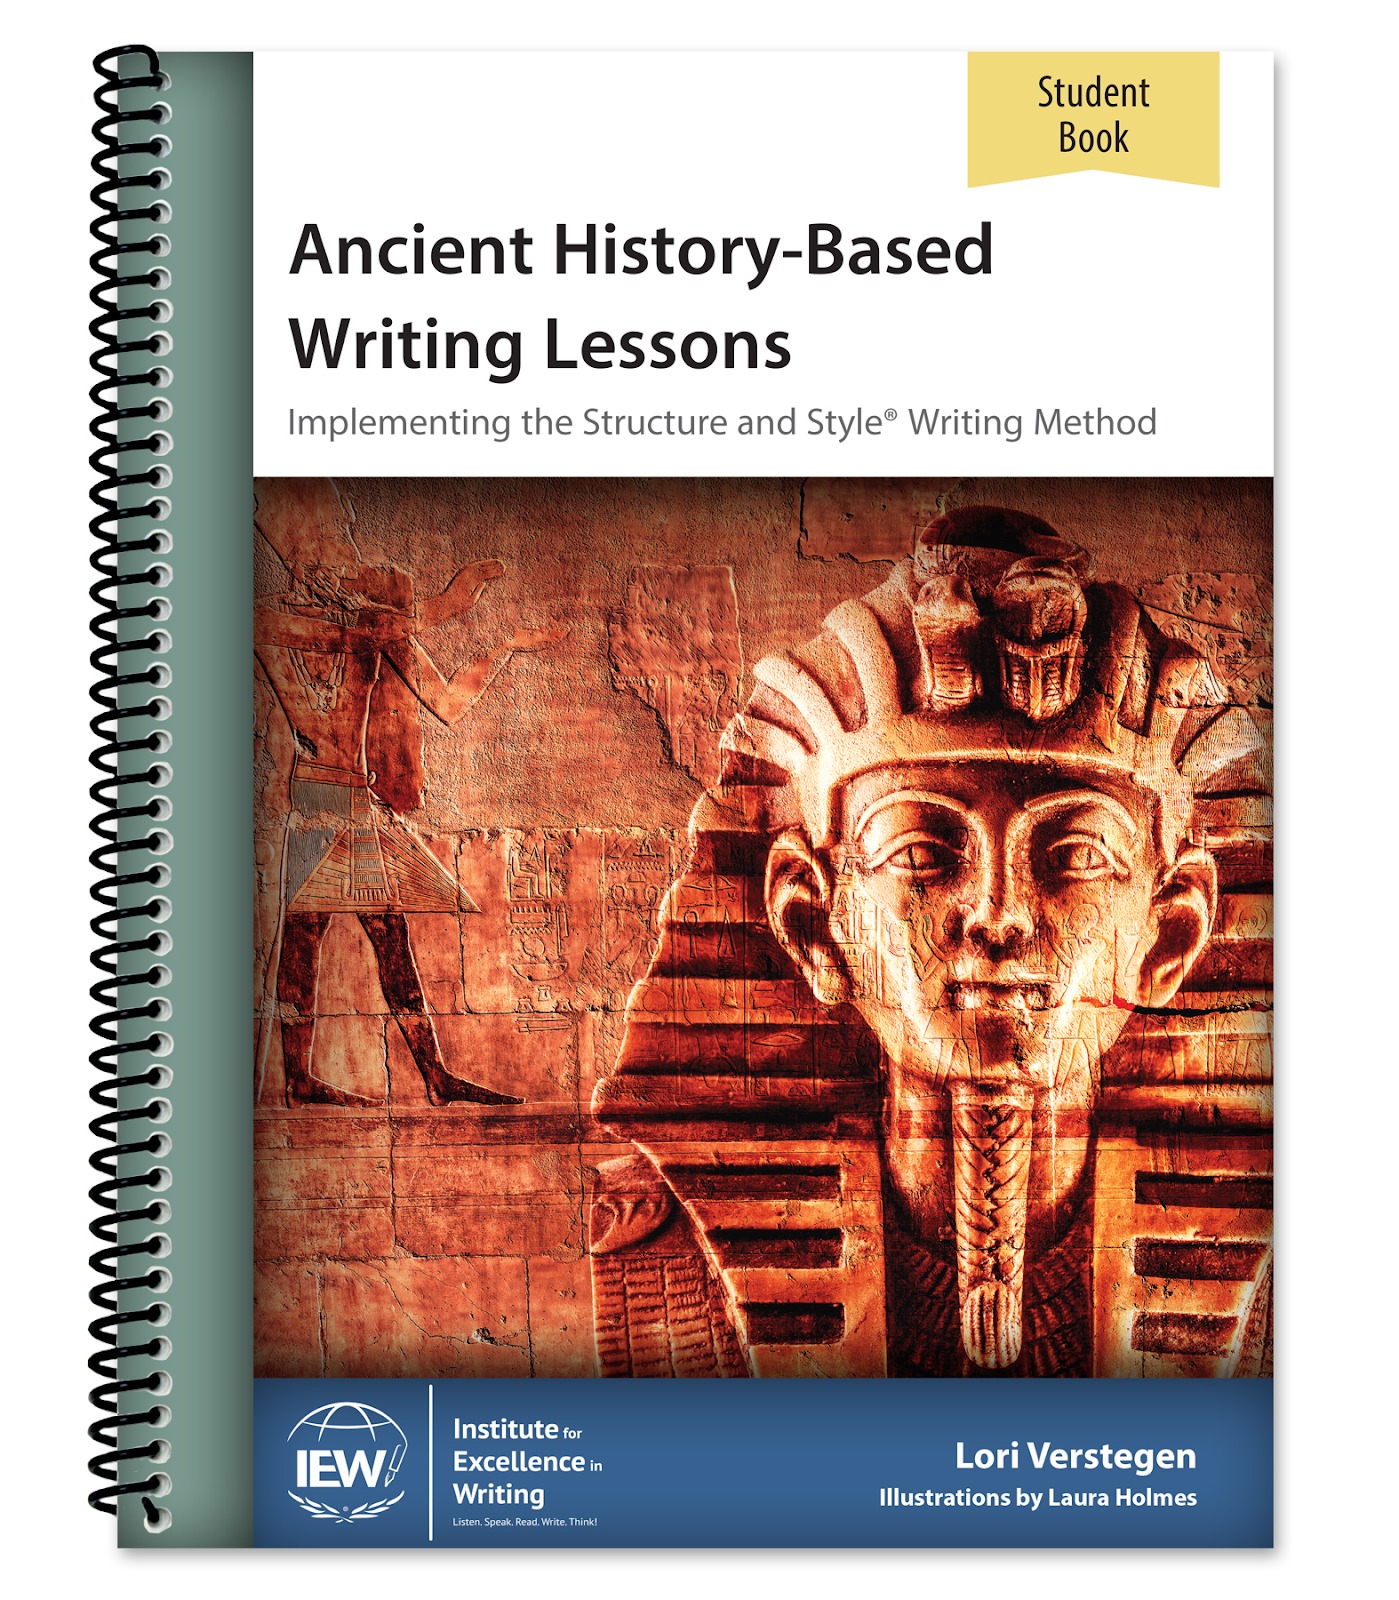 Ancient History-Based Writing Lessons - Student Book (28th Edition)